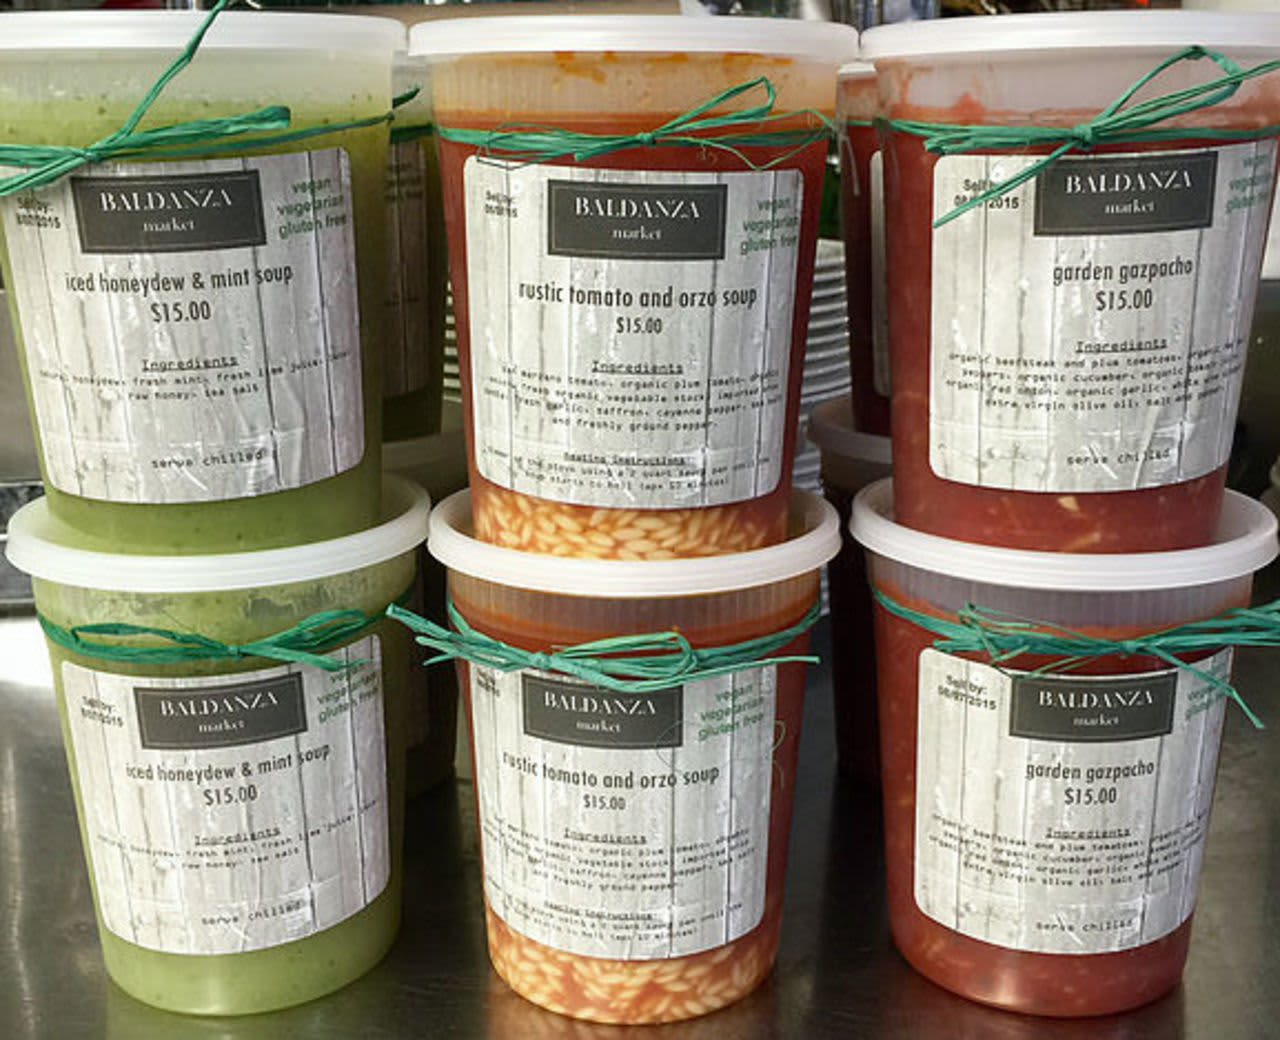 The Baldanza Soup Kitchen line will benefit the Connecticut Food Bank.